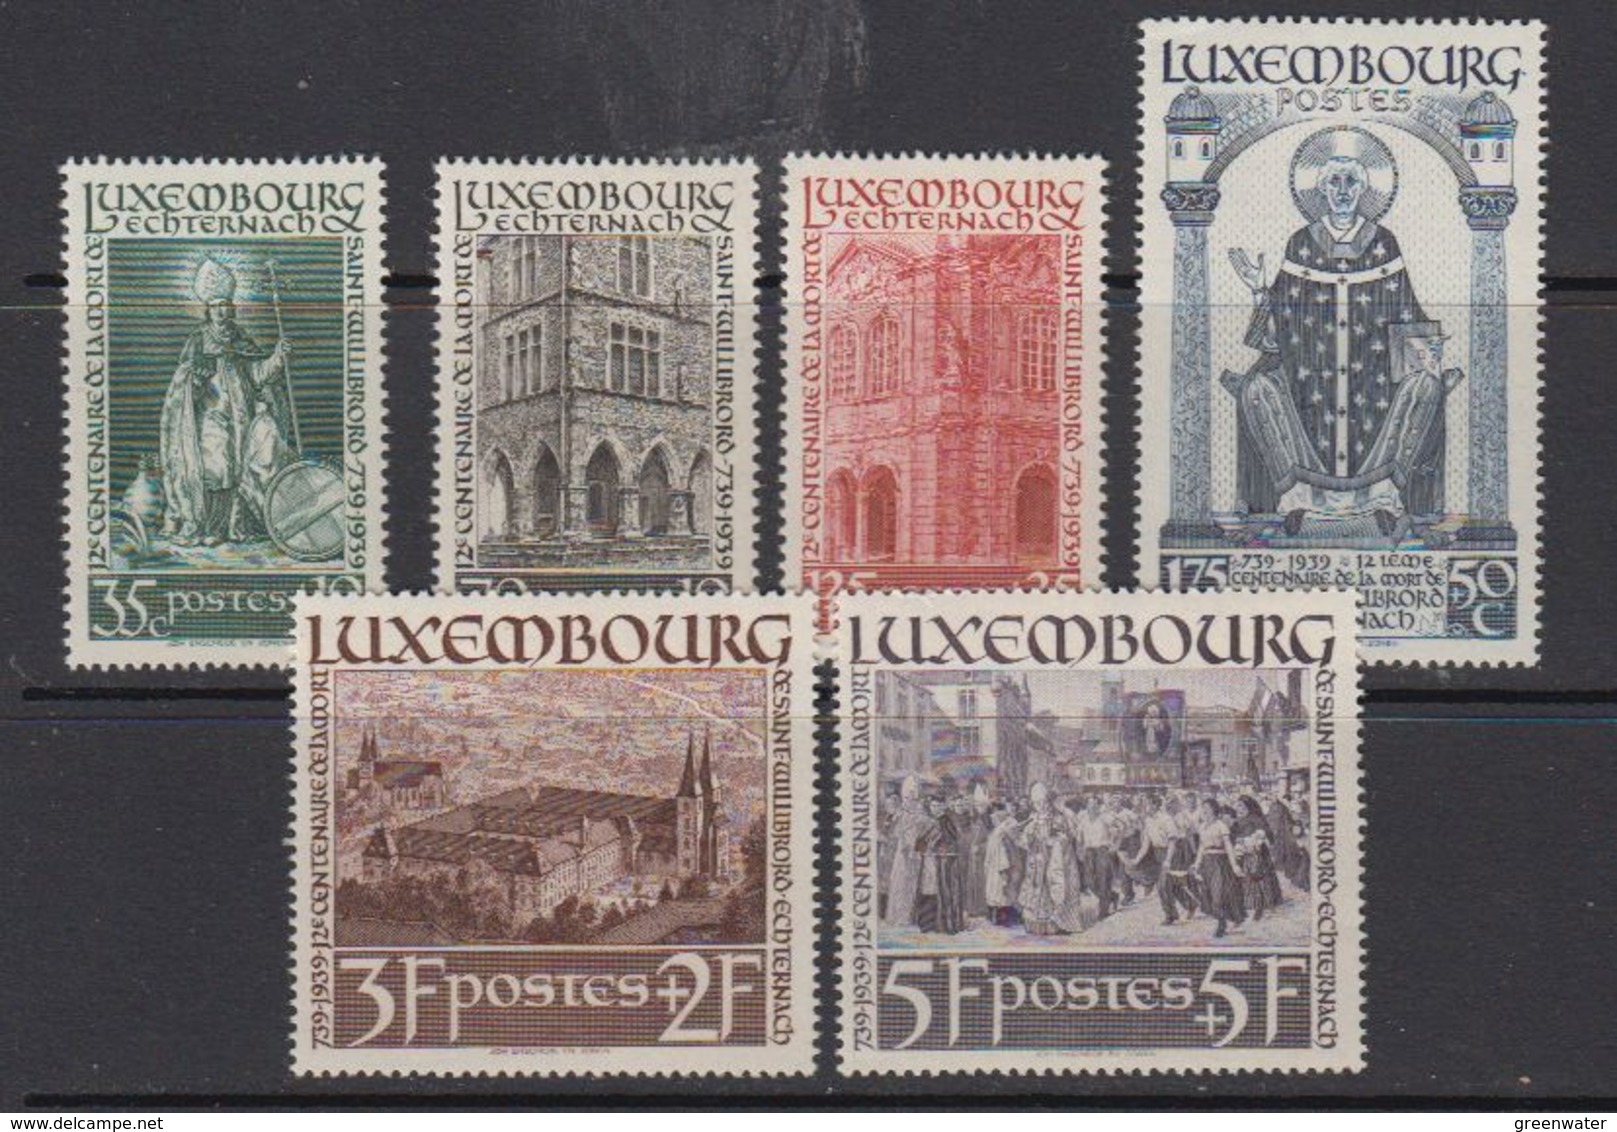 Luxemburg 1938 Hl. Willibrord 6v Mostly * Mh (= Mint, Hinged) 2 Highest Values Are ** Mnh(41259) - Ongebruikt